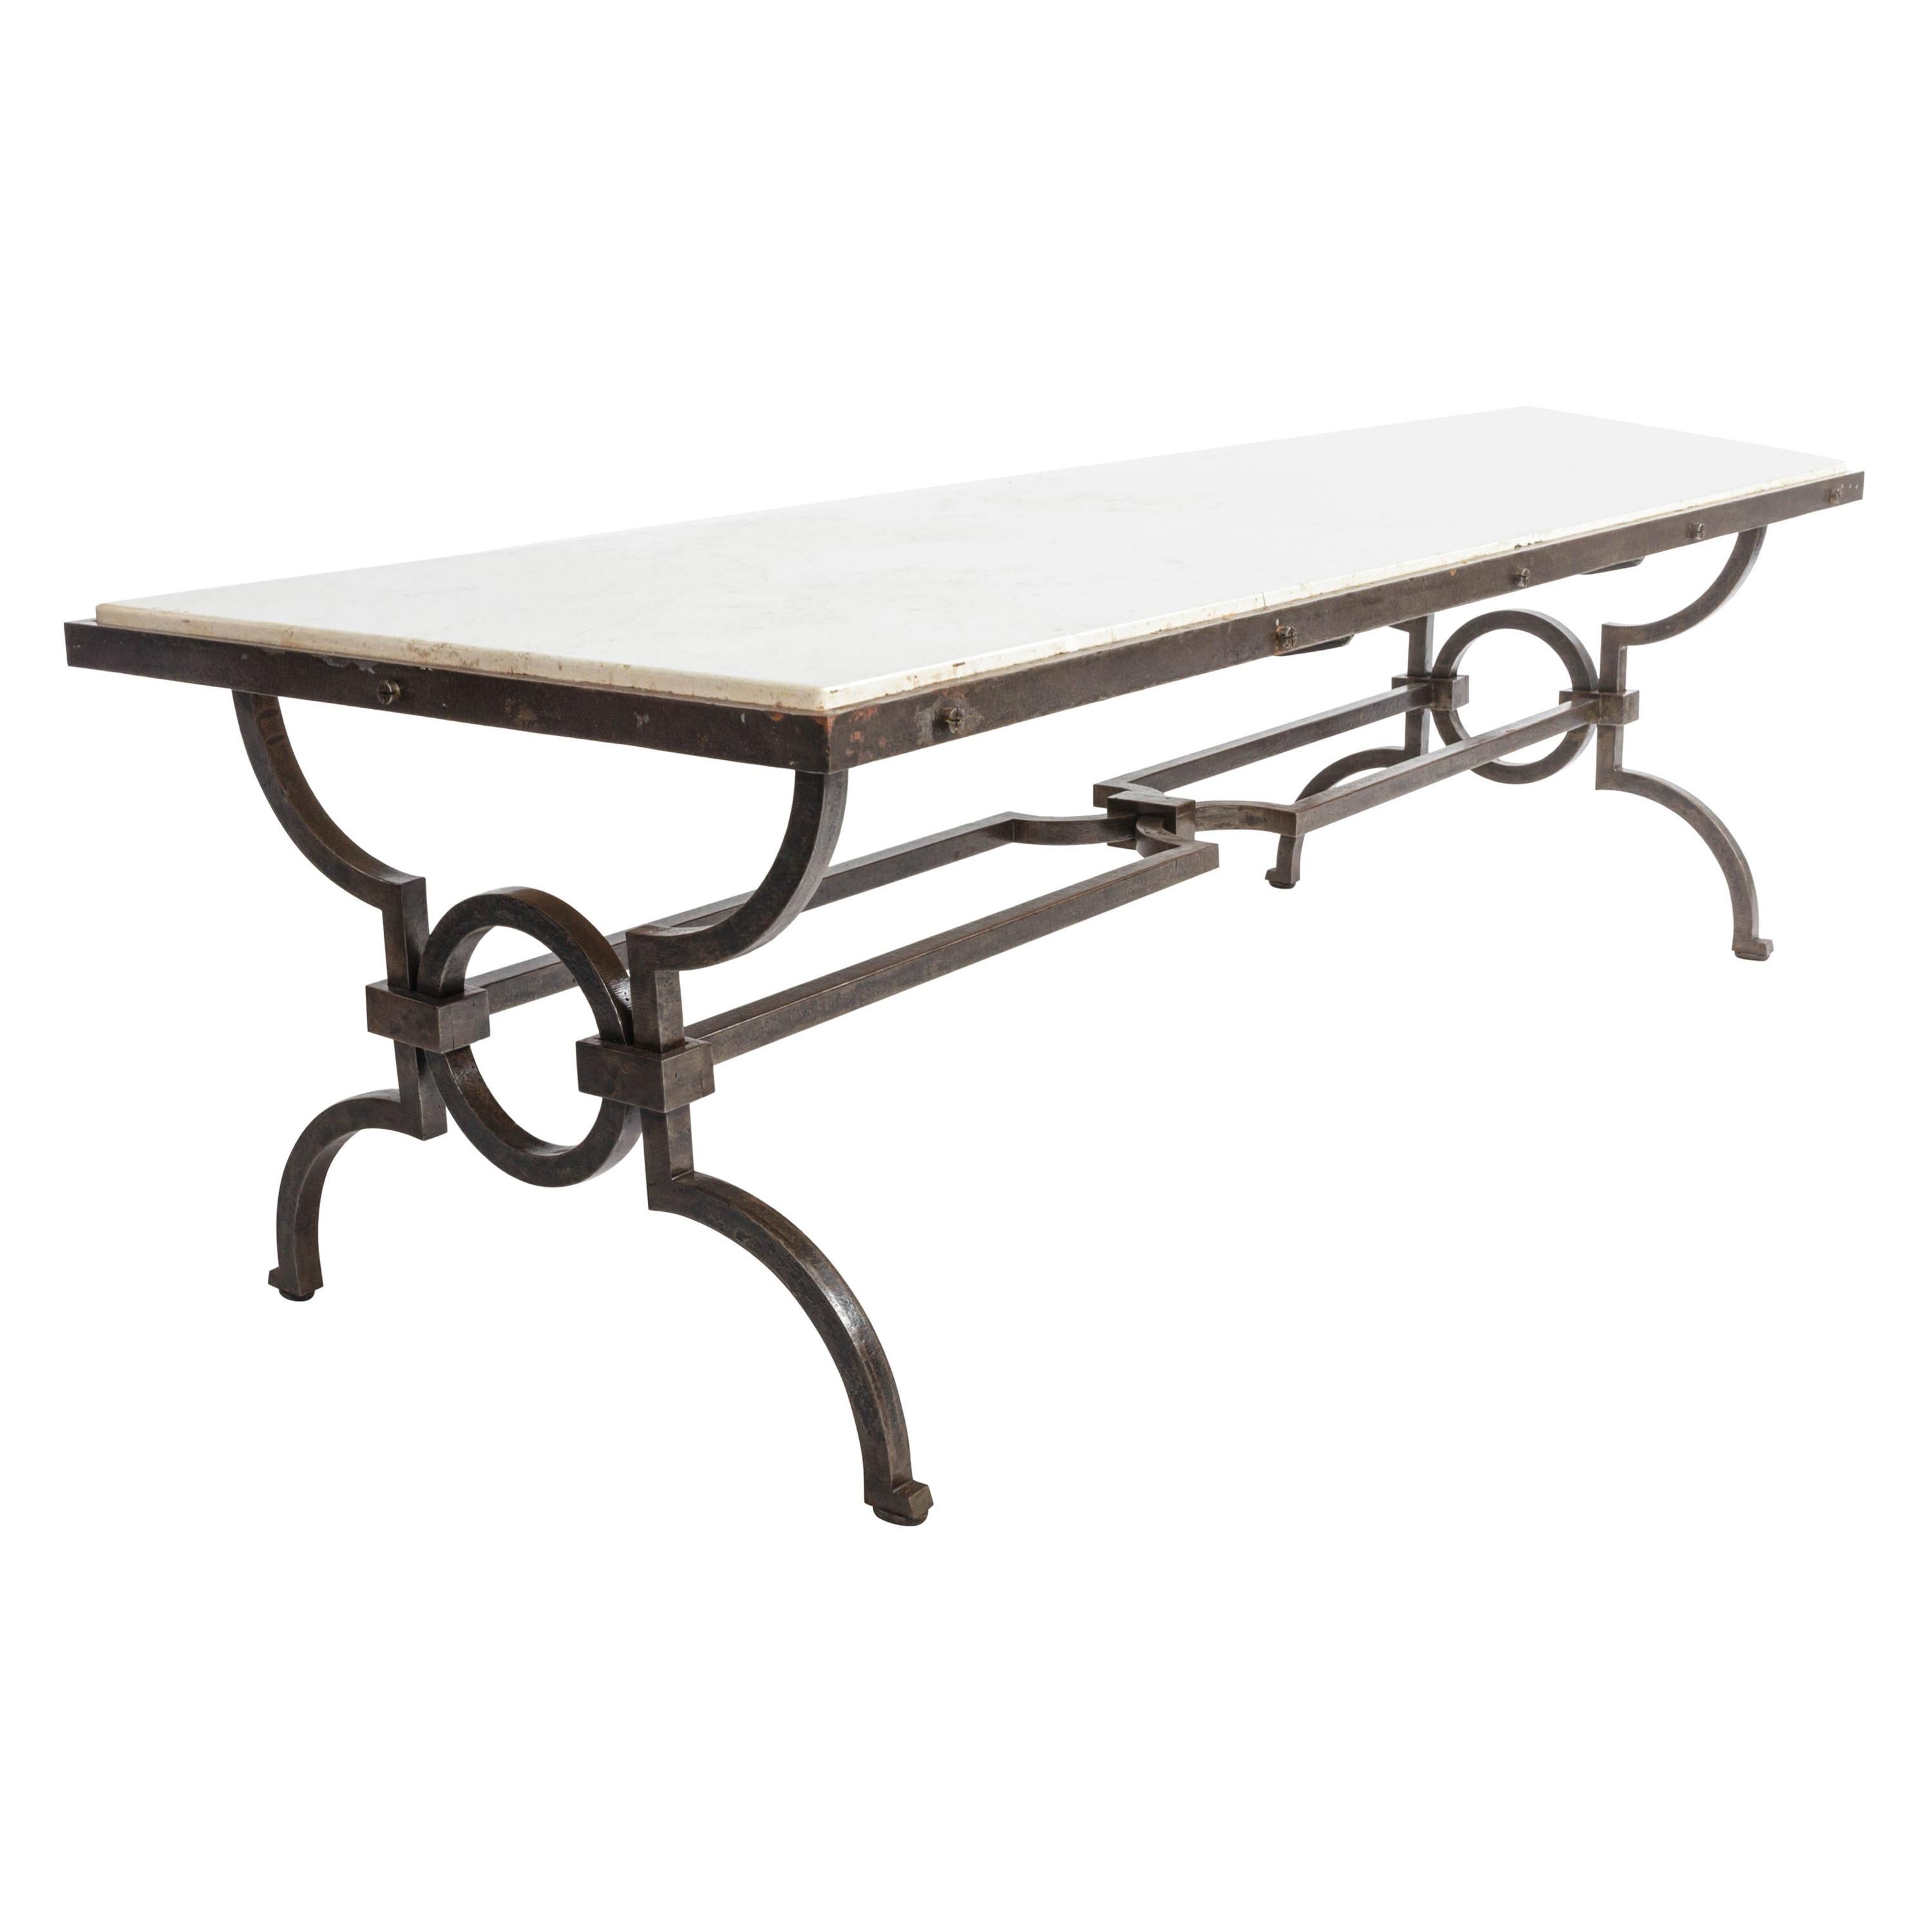 Black Patinated and Gilded Wrought Iron Coffee Table by Gilbert Poillerat, Franc